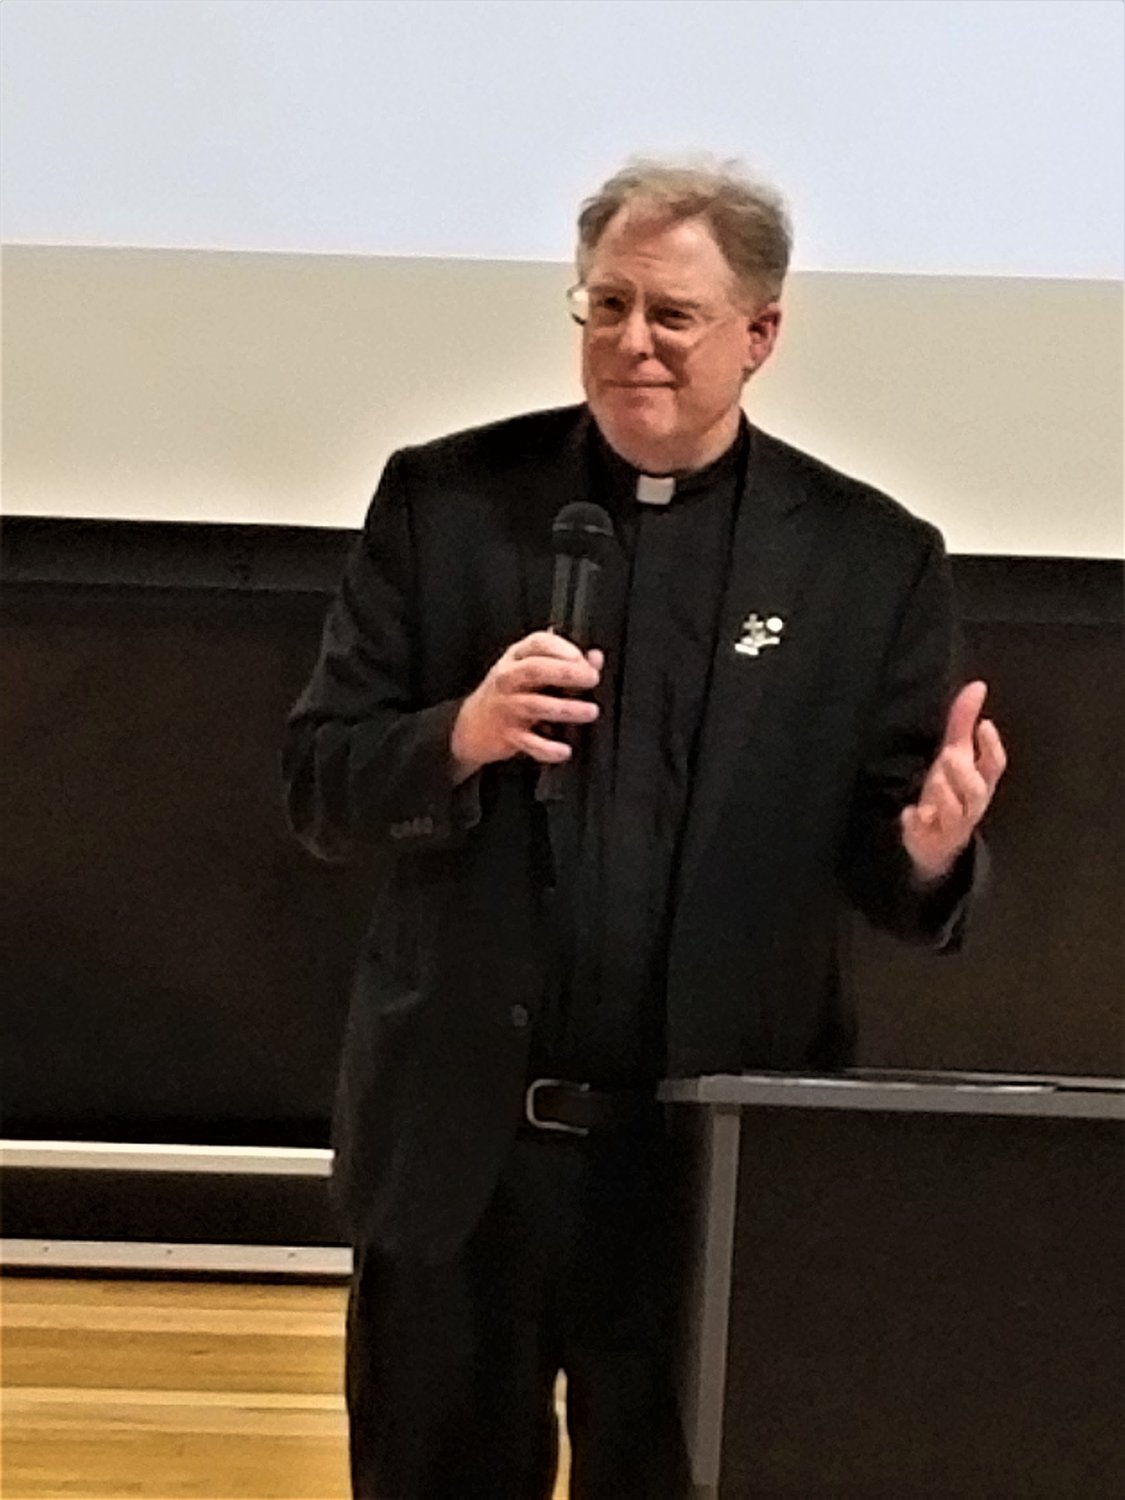 Father Thomas McCabe, Holy Trinity Catholic Church, is one of three Goodhue faith leaders involved in forming the new Community Health Awareness Coalition.  He welcomed those attending the mental health forum sponsored by the coalition on September 25th.